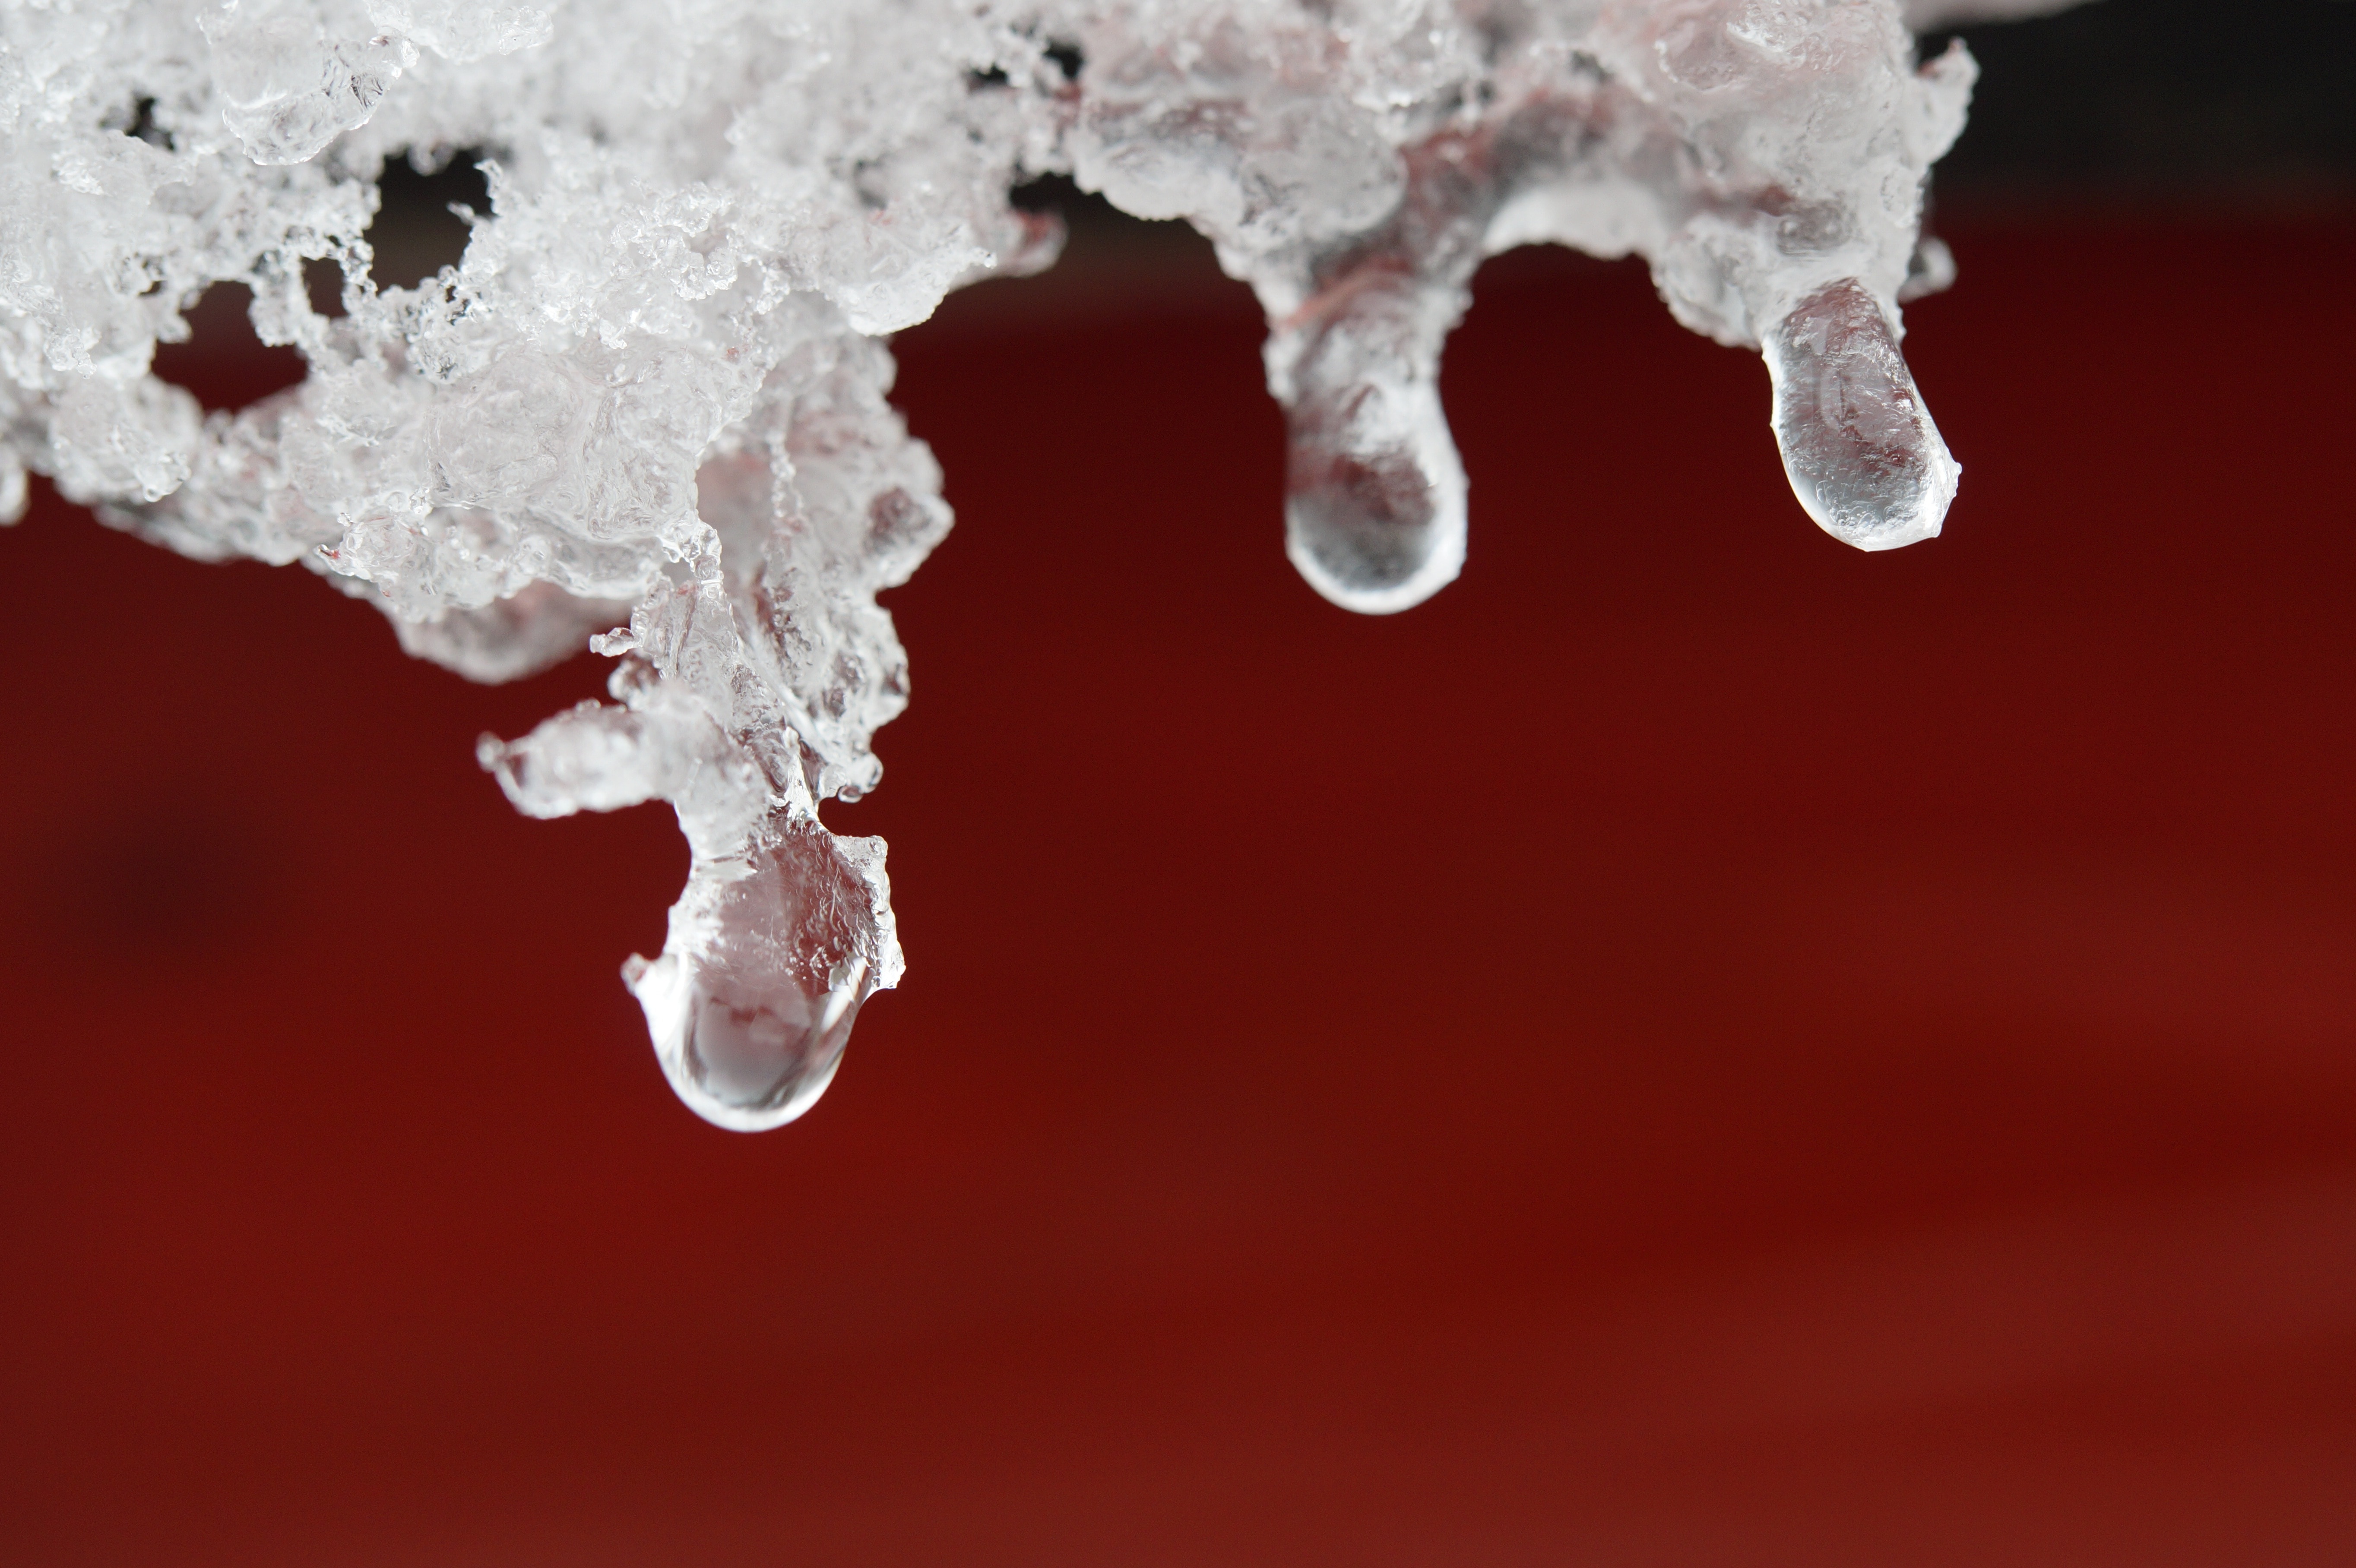 Winter, Defrost, Drip, Wintry, Snow, Ice, colored background, red